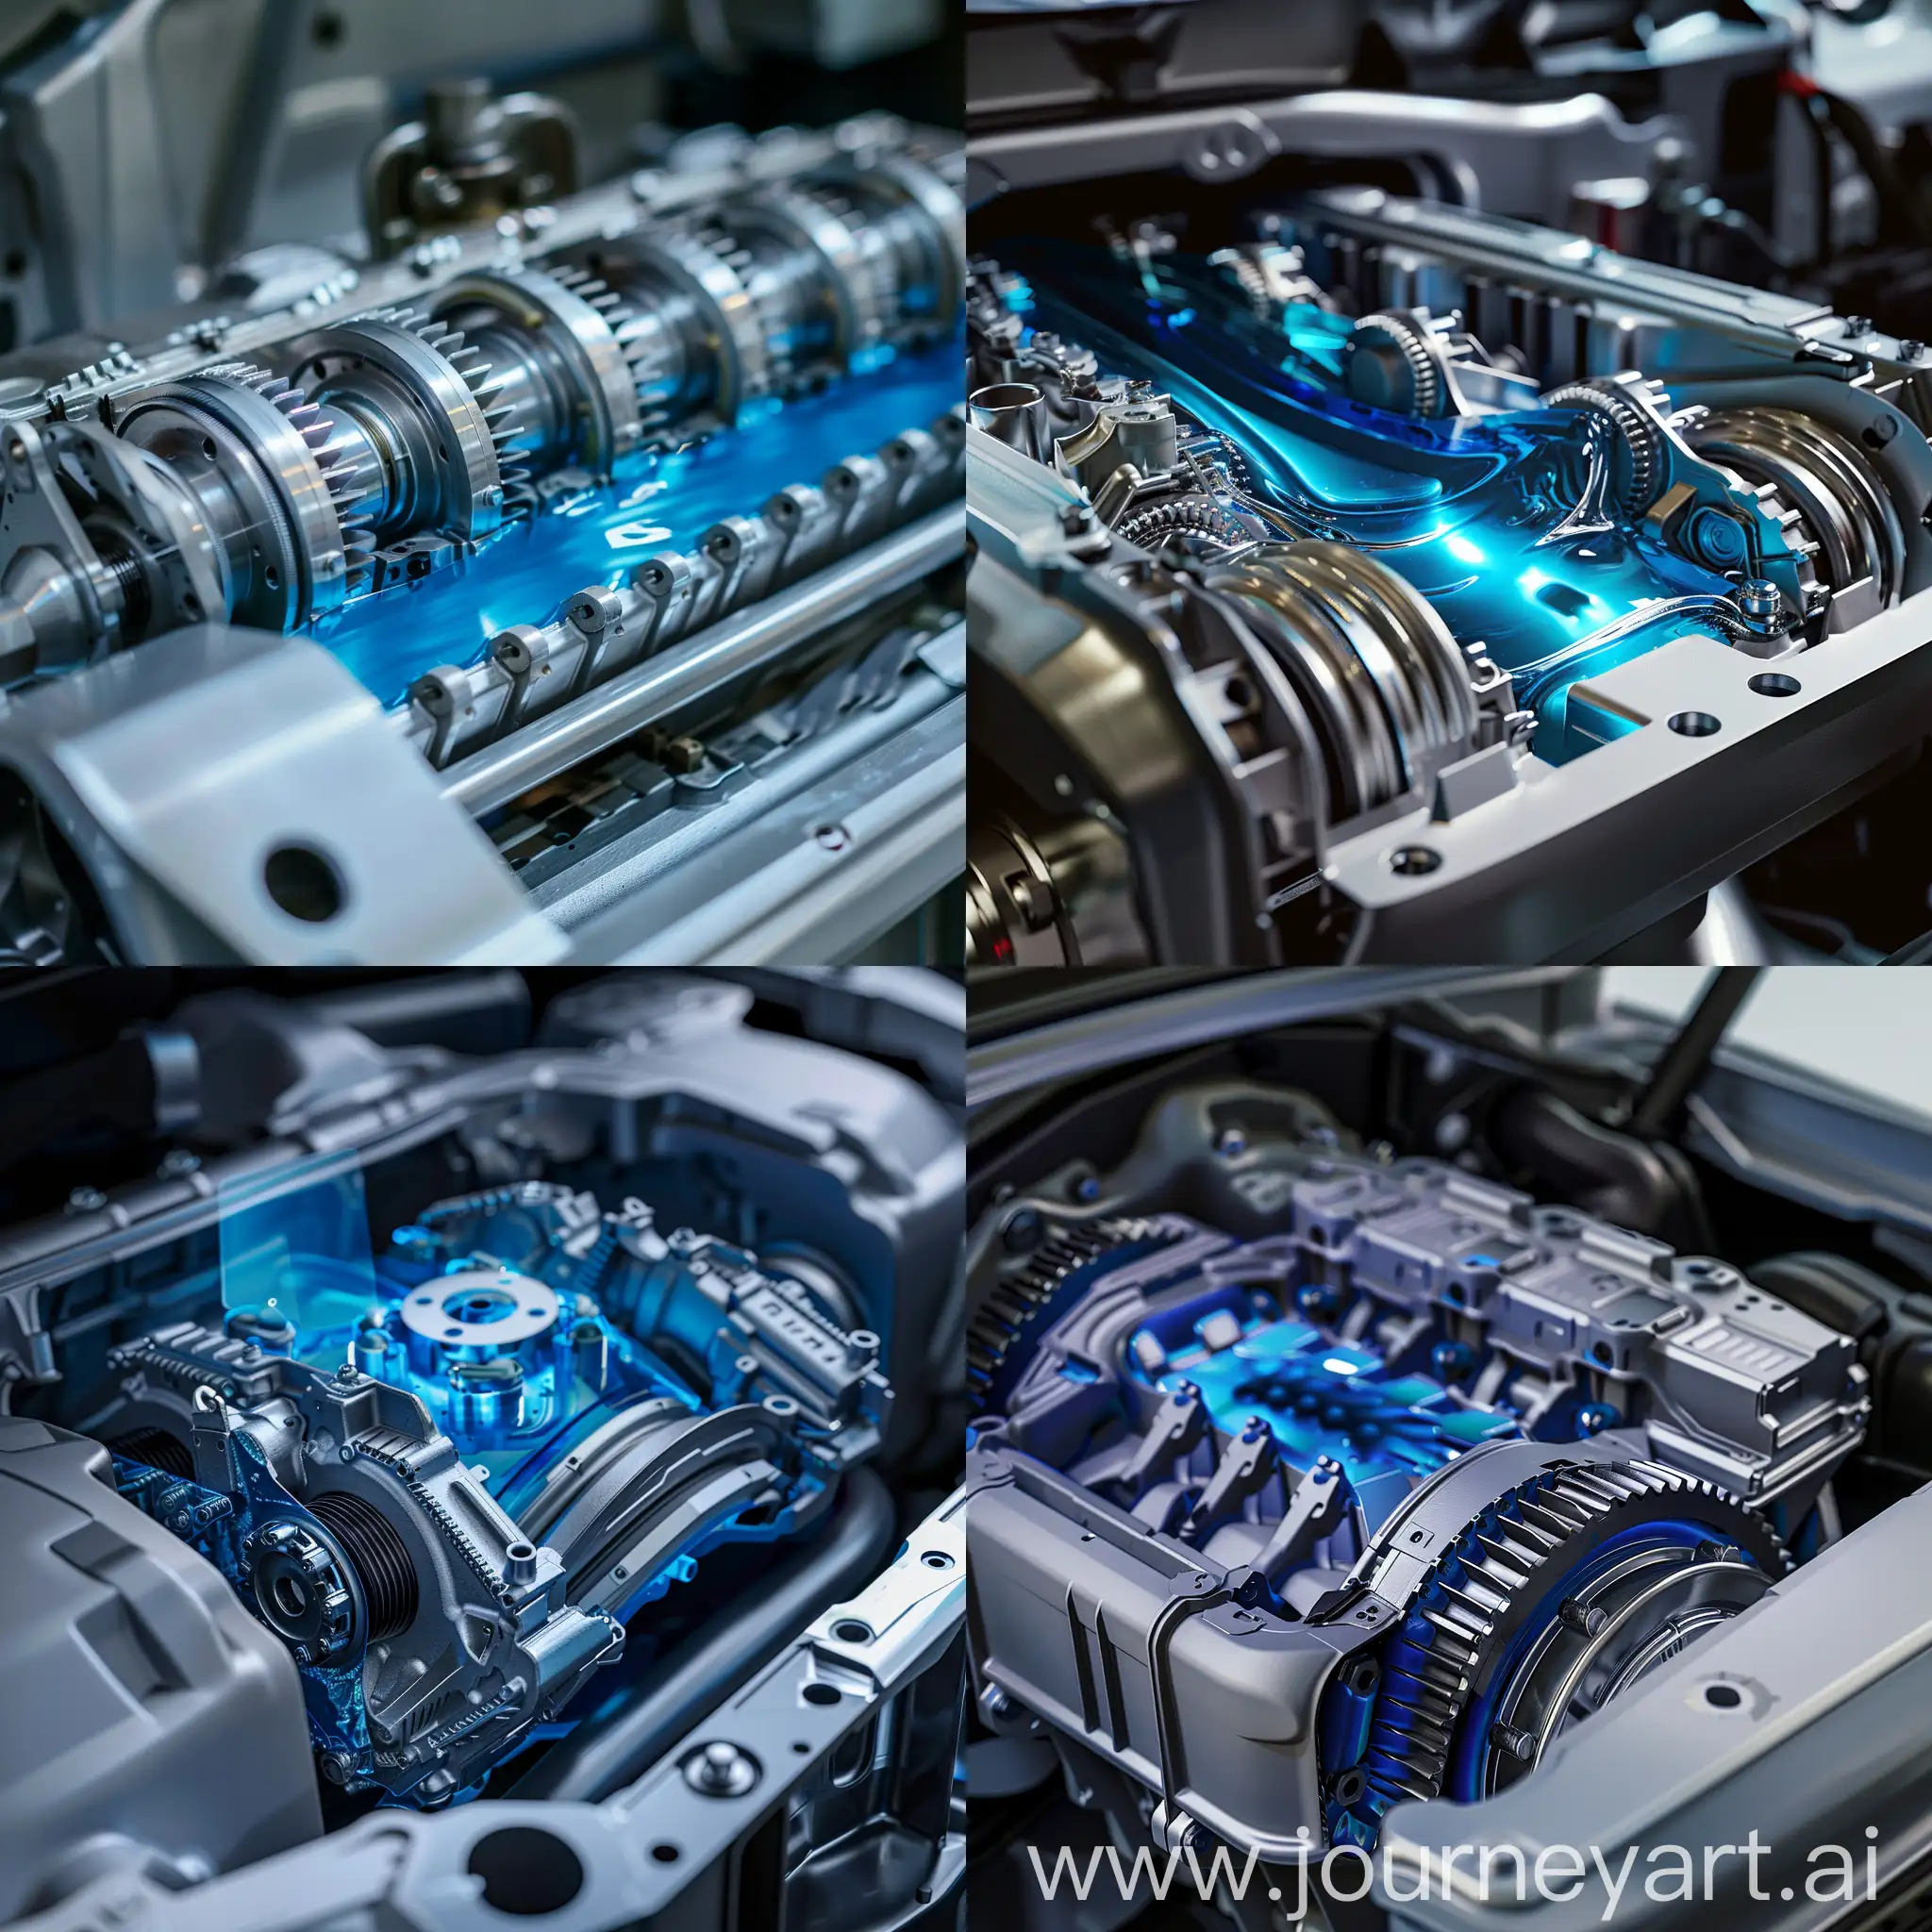 Blue-Transmission-Gear-with-Fluid-Automotive-Engineering-Concept